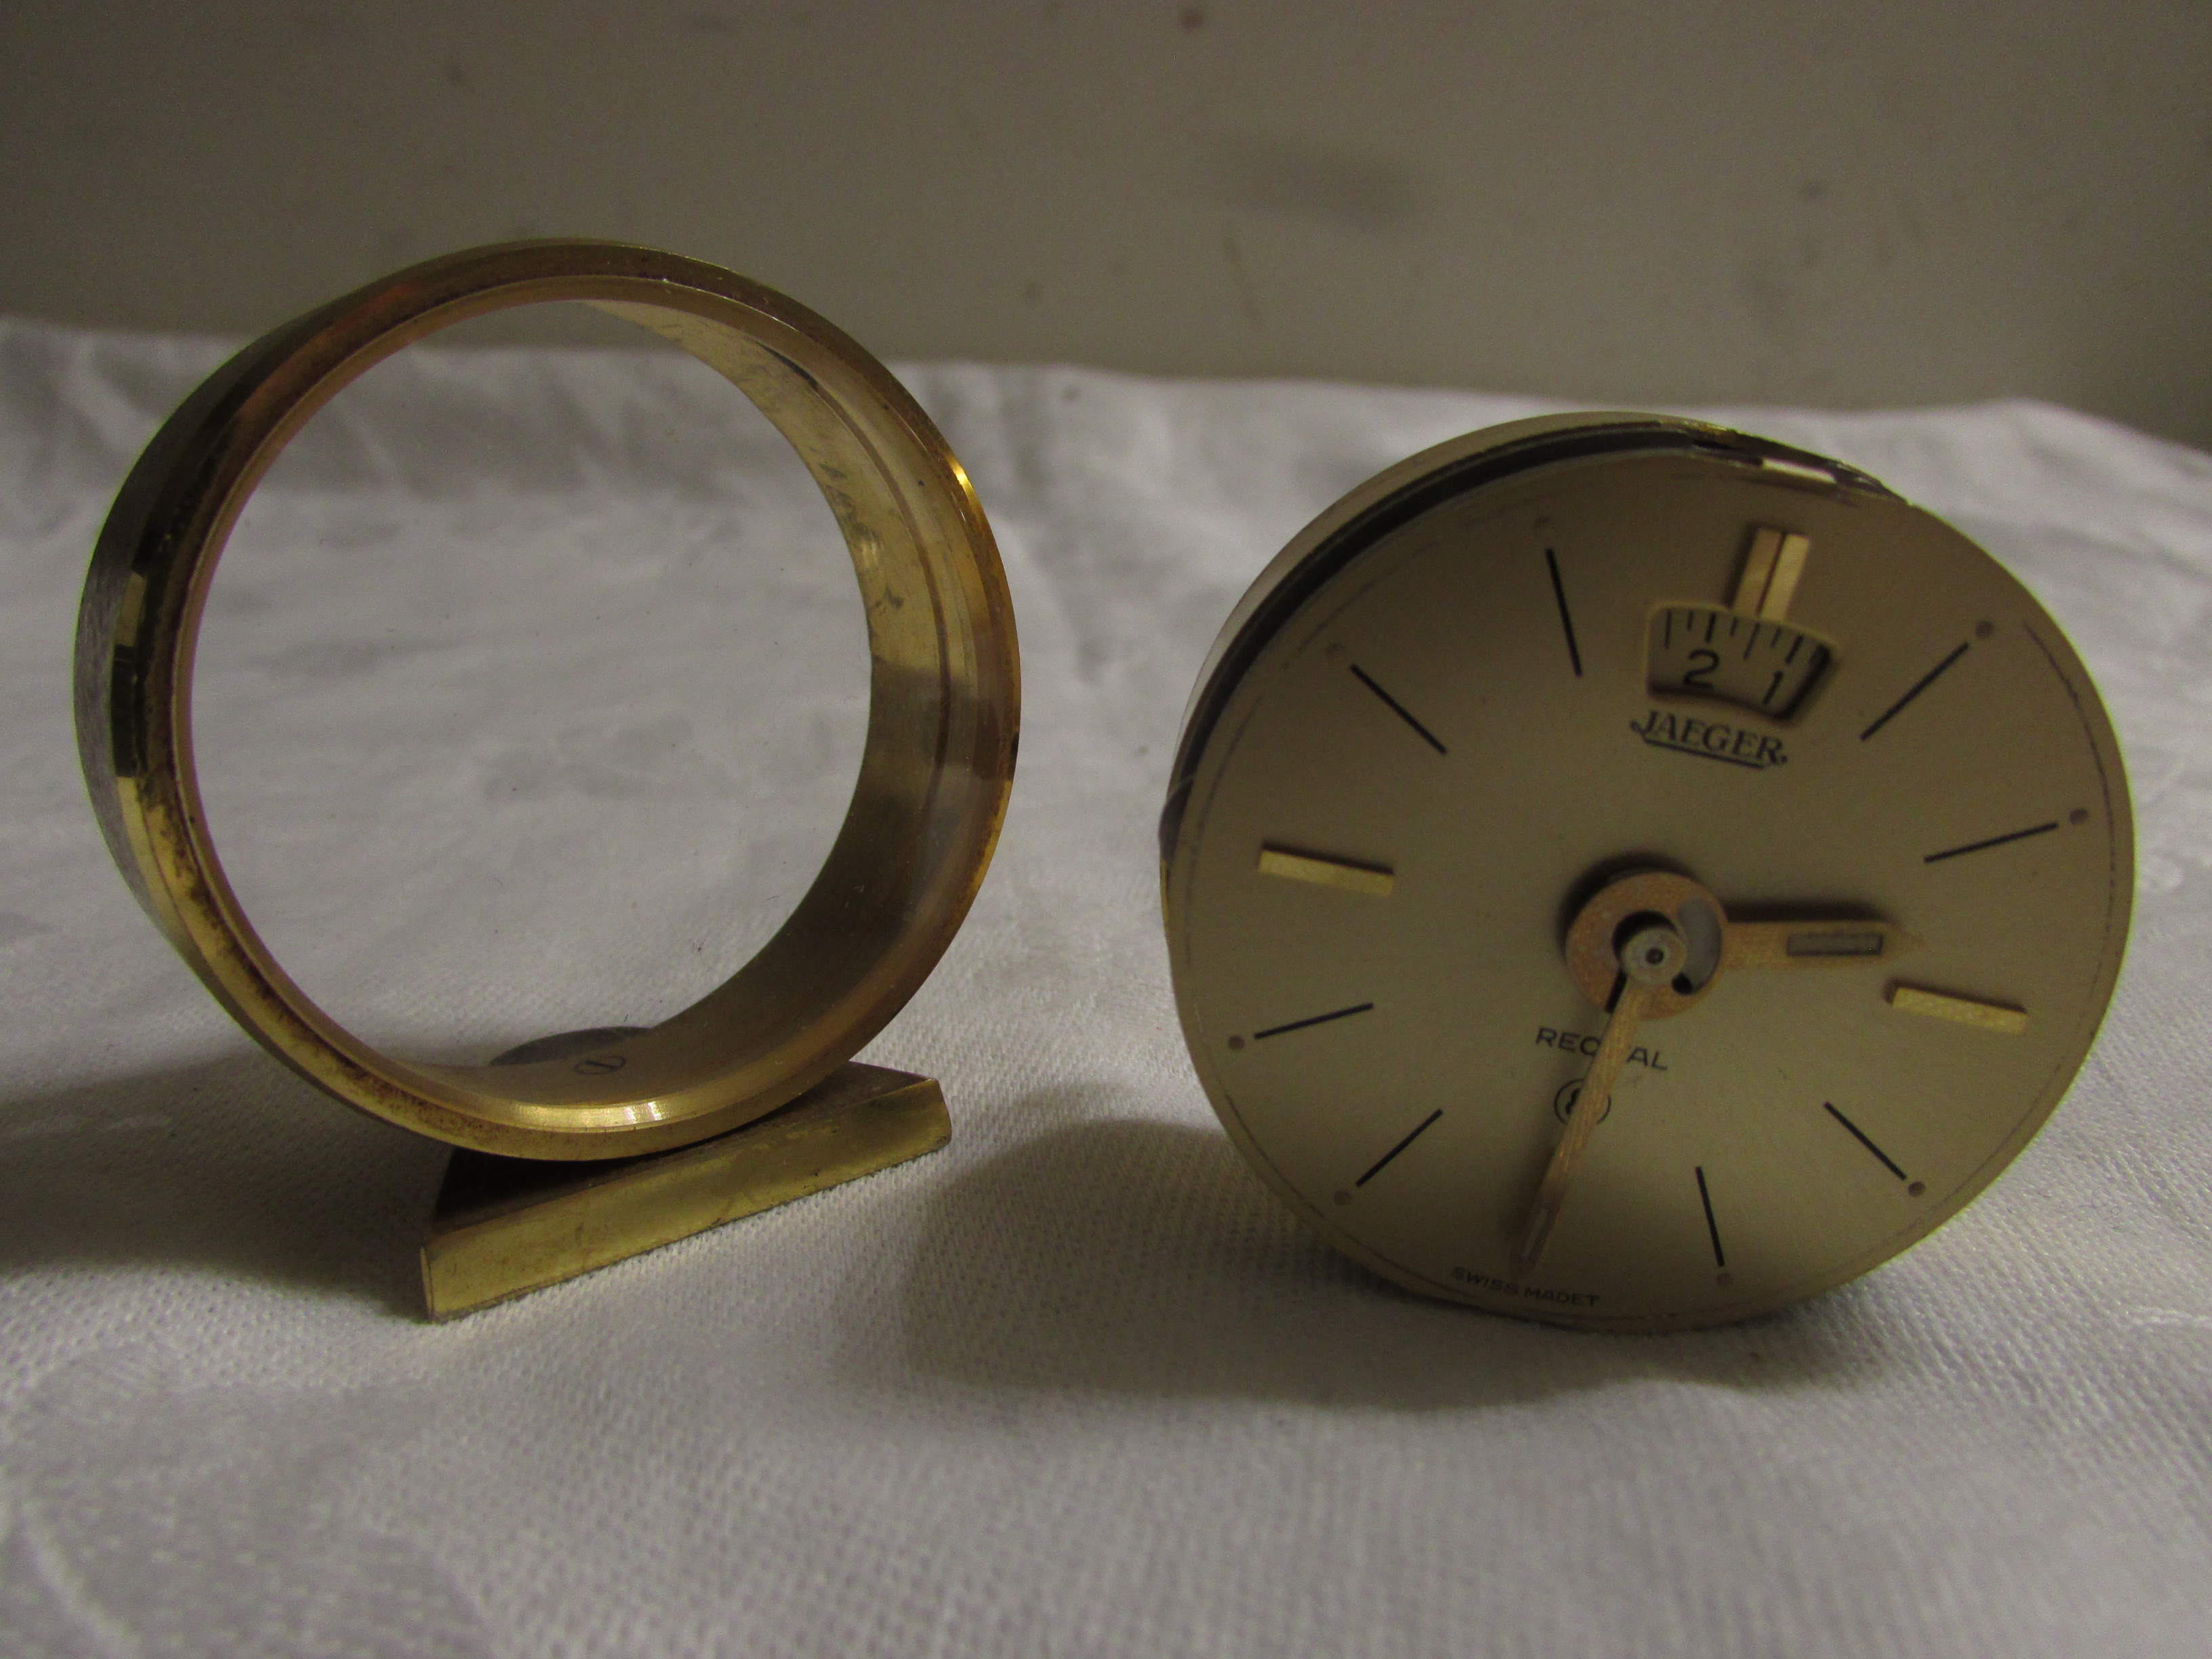 Jaeger Recital eight-day bedside alarm clock in gold coloured finish, diameter of dial 4cm (a/f) - Image 4 of 4